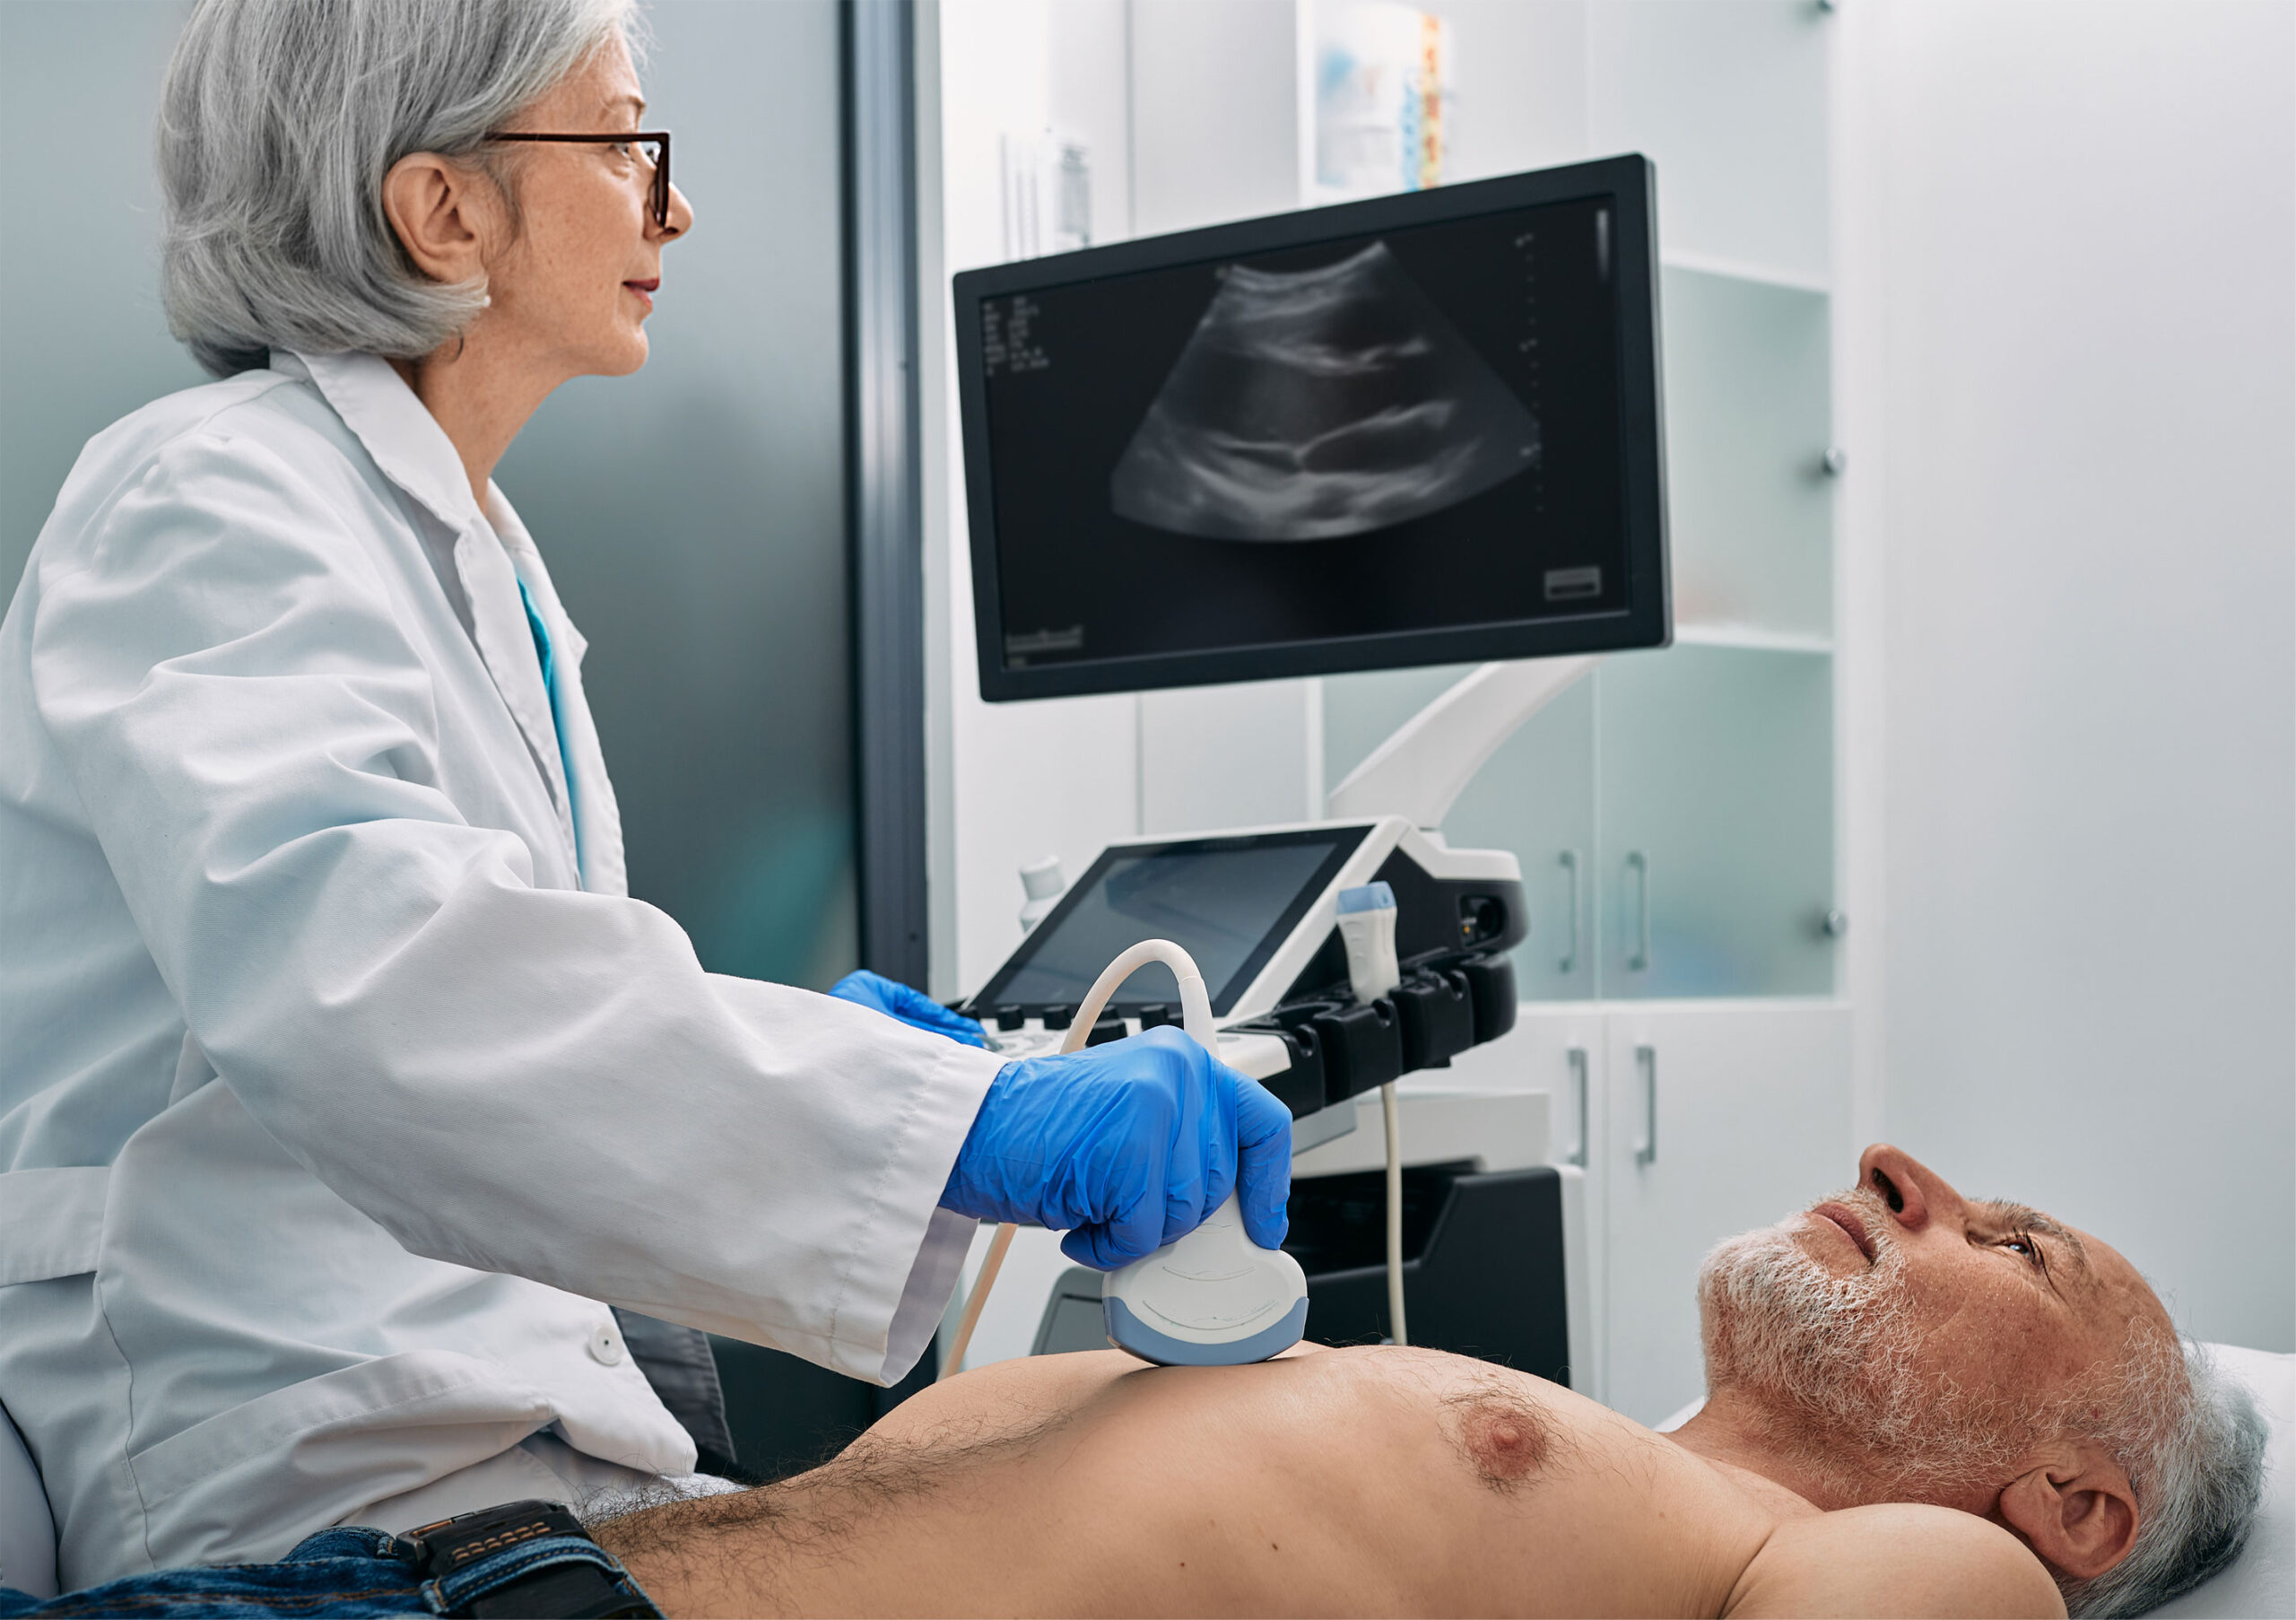 Senior man on examining table while technician holds an ultrasound wand over his heart with diagnostic machine in the background.